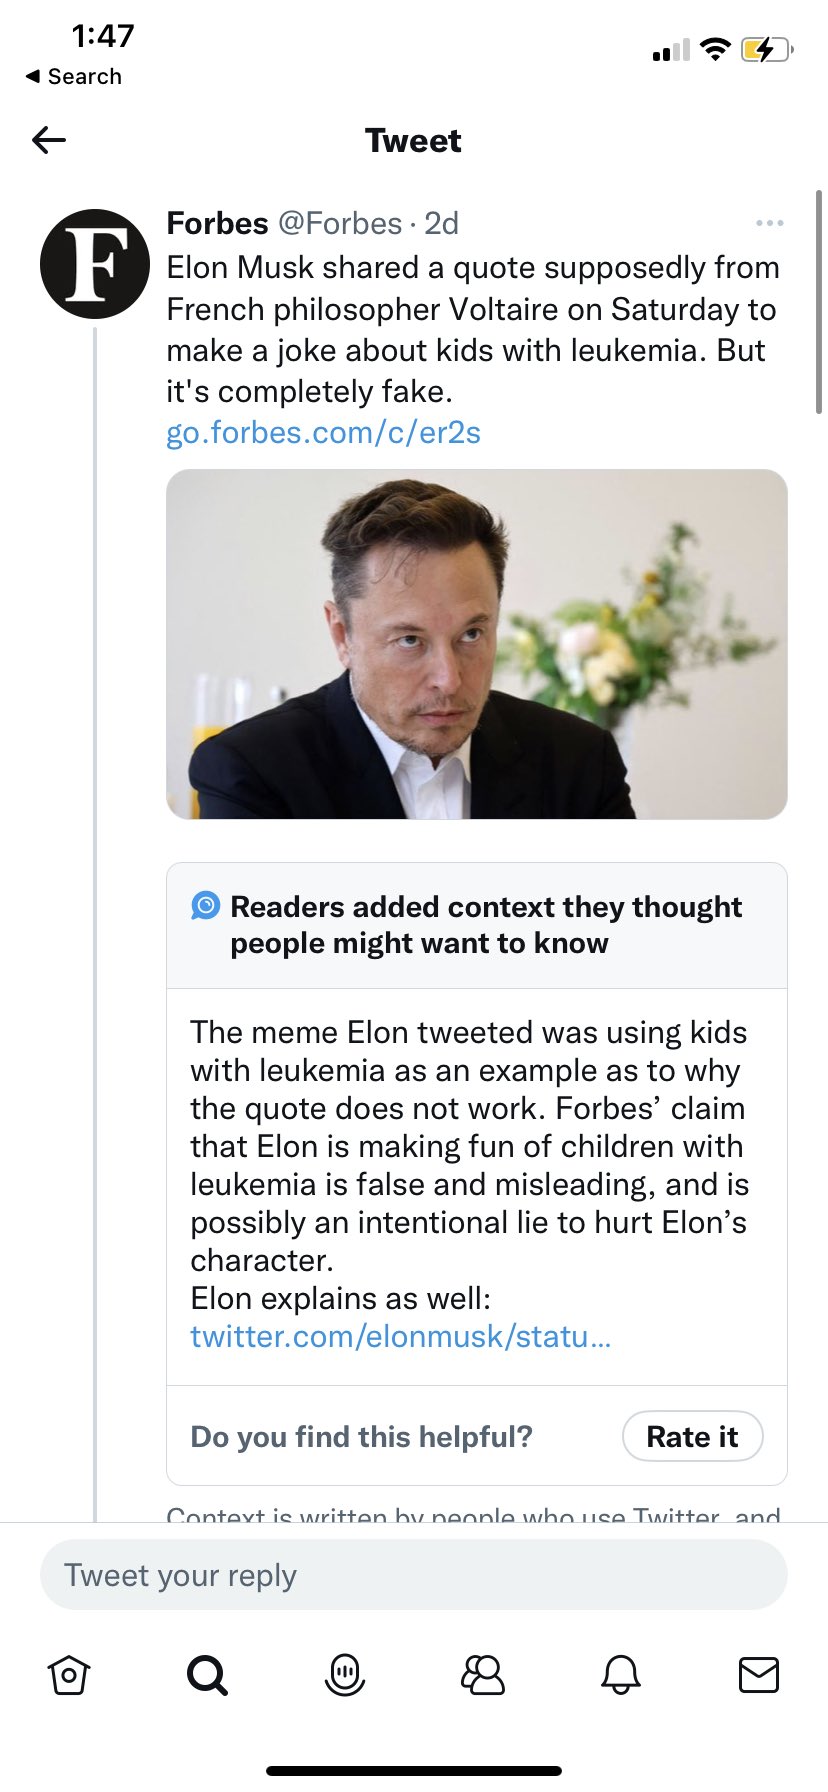 funny community notes - web page - Search F Forbes 2d Elon Musk d a quote supposedly from French philosopher Voltaire on Saturday to make a joke about kids with leukemia. But it's completely fake. go.forbes.comcer2s Tweet Readers added context they though